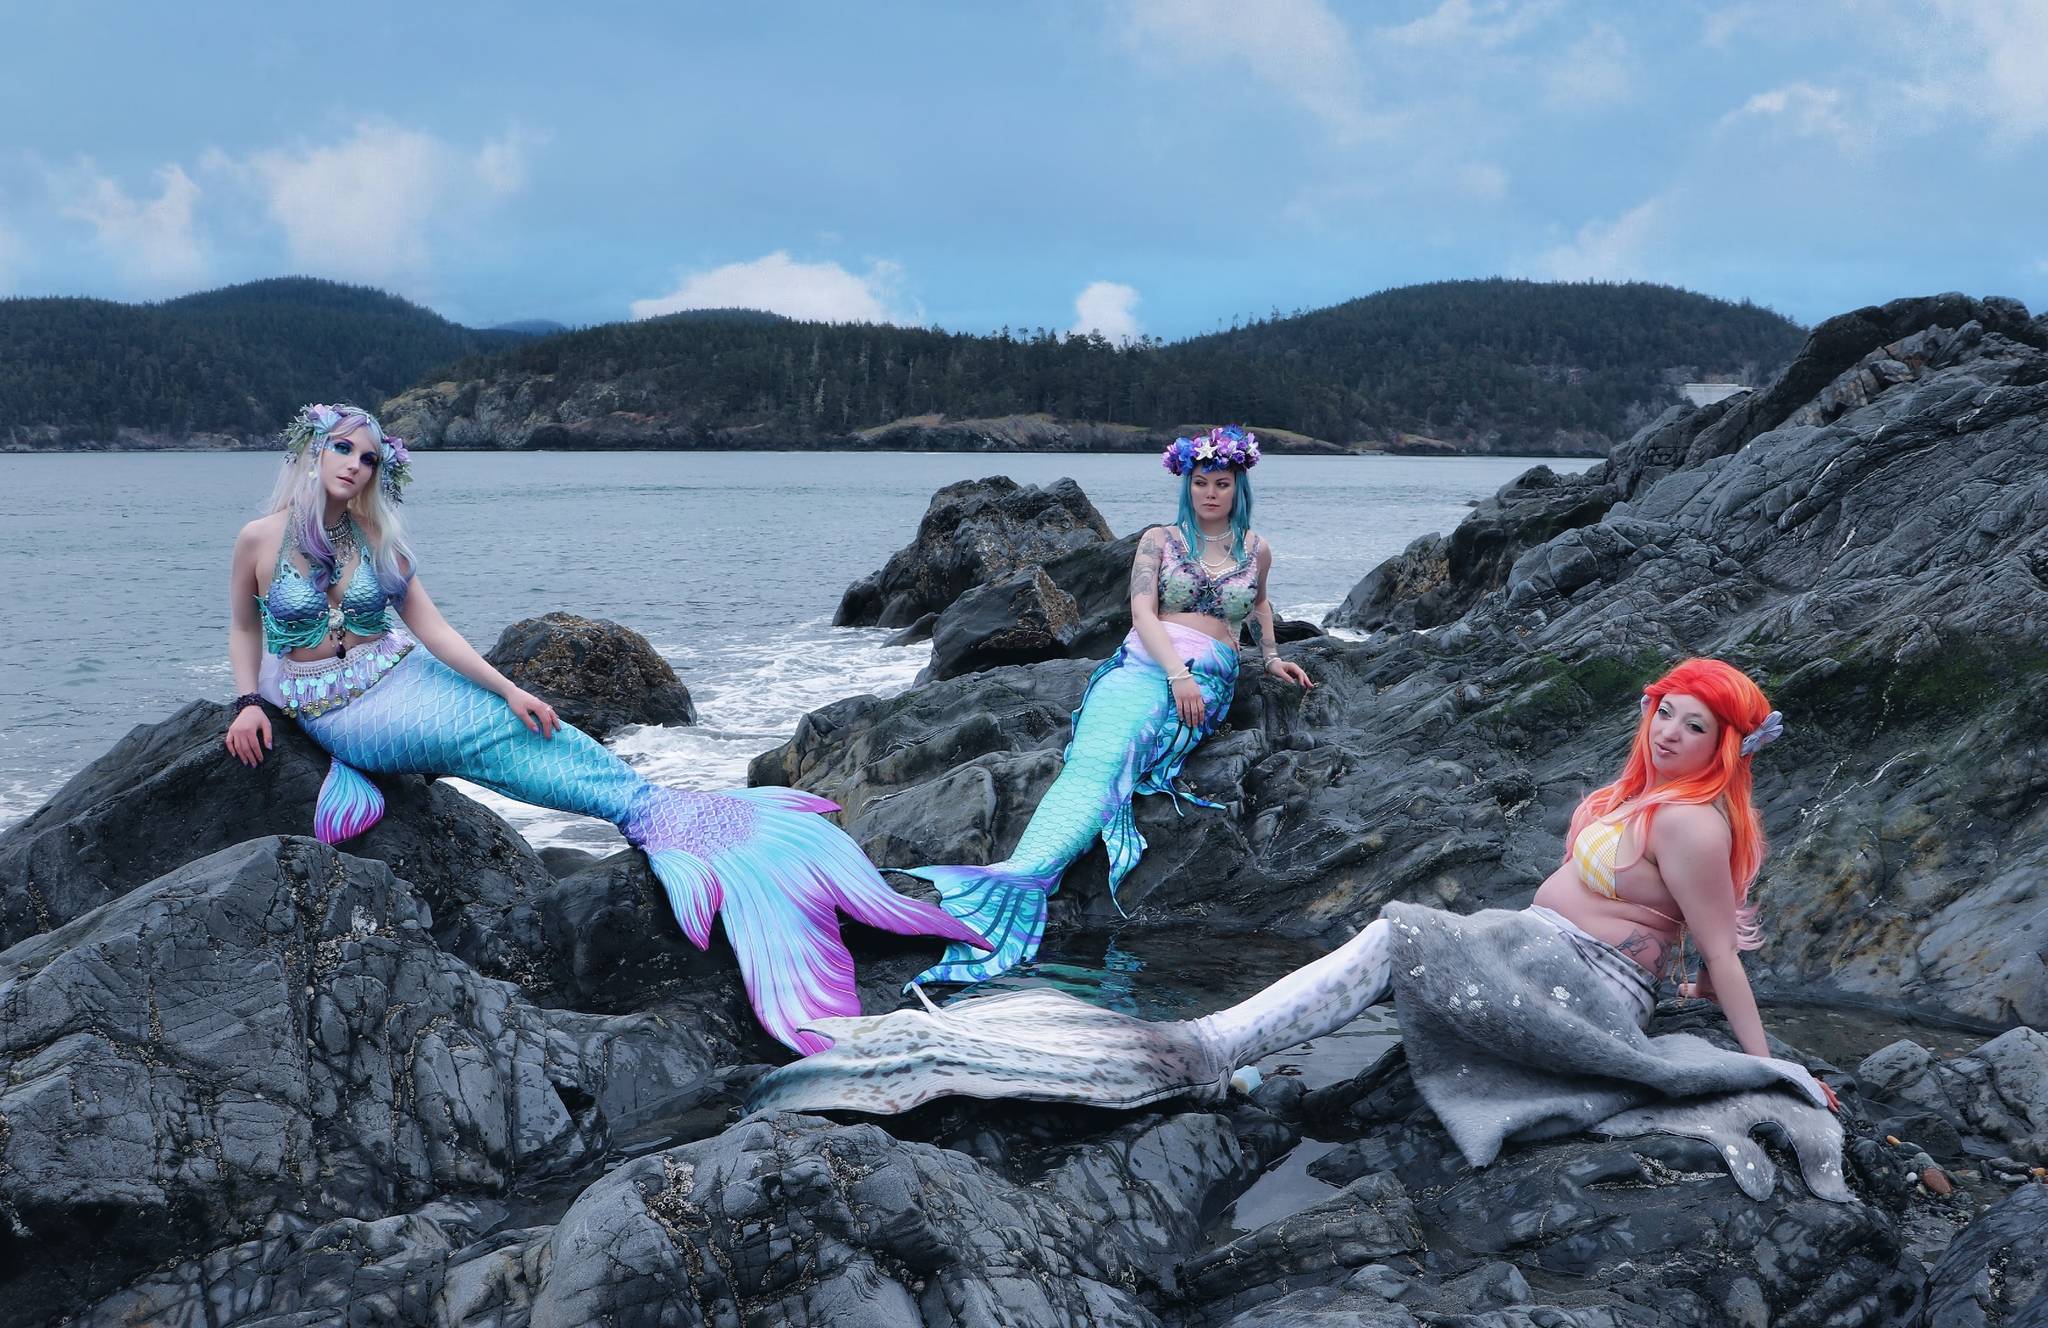 Photo provided
Stella Rowan, left, Savannah Mounce and Luna Grove, right, get together for swims and photoshoots like this one at Deception Pass State Park. The trio of two mermaids and a self-described “heavy metal selkie” call themselves the Whidbey Island Sirens.